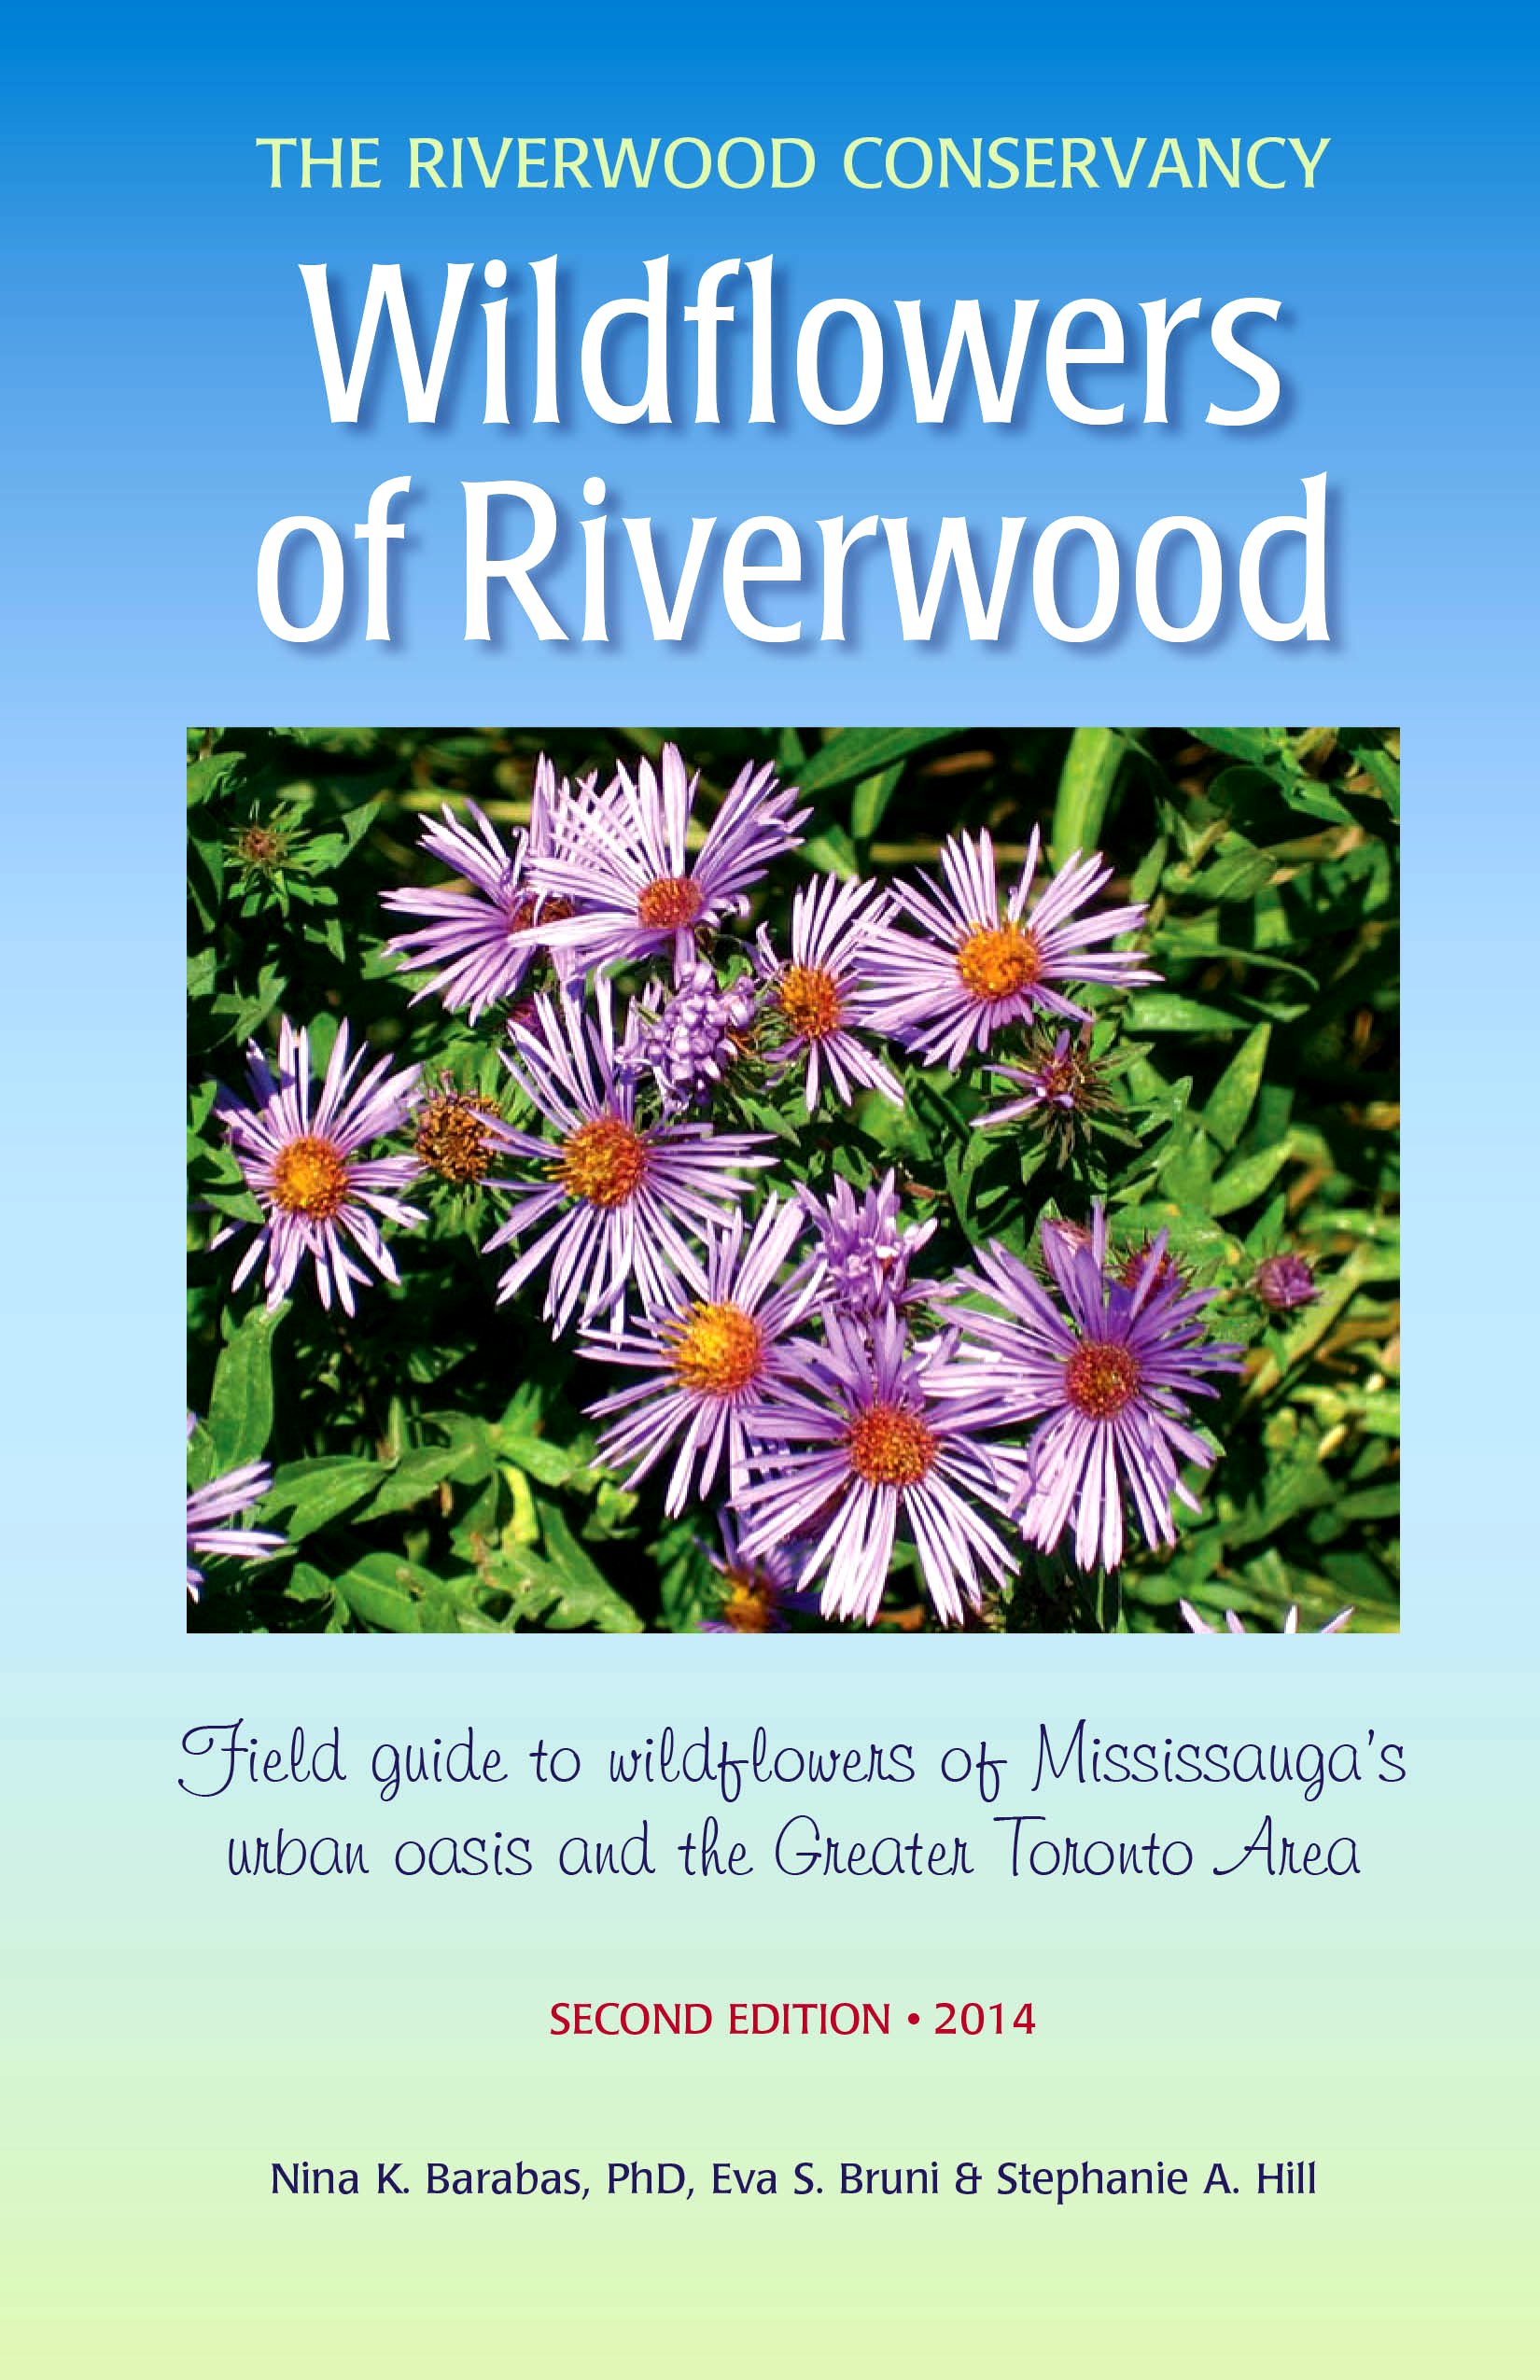 Wildflowers of Riverwood, Field Guide to Wildflowers of Mississauga's Garden Park and the Greater Toronto Area by Co-authors: Nina Katalin Barabas, PhD, Eva Sabrina Bruni and Stephanie-Ann Hill. Google image from http://www.theriverwoodconservancy.org/index.php/online-shop/product/13-wildflowers-of-riverwood